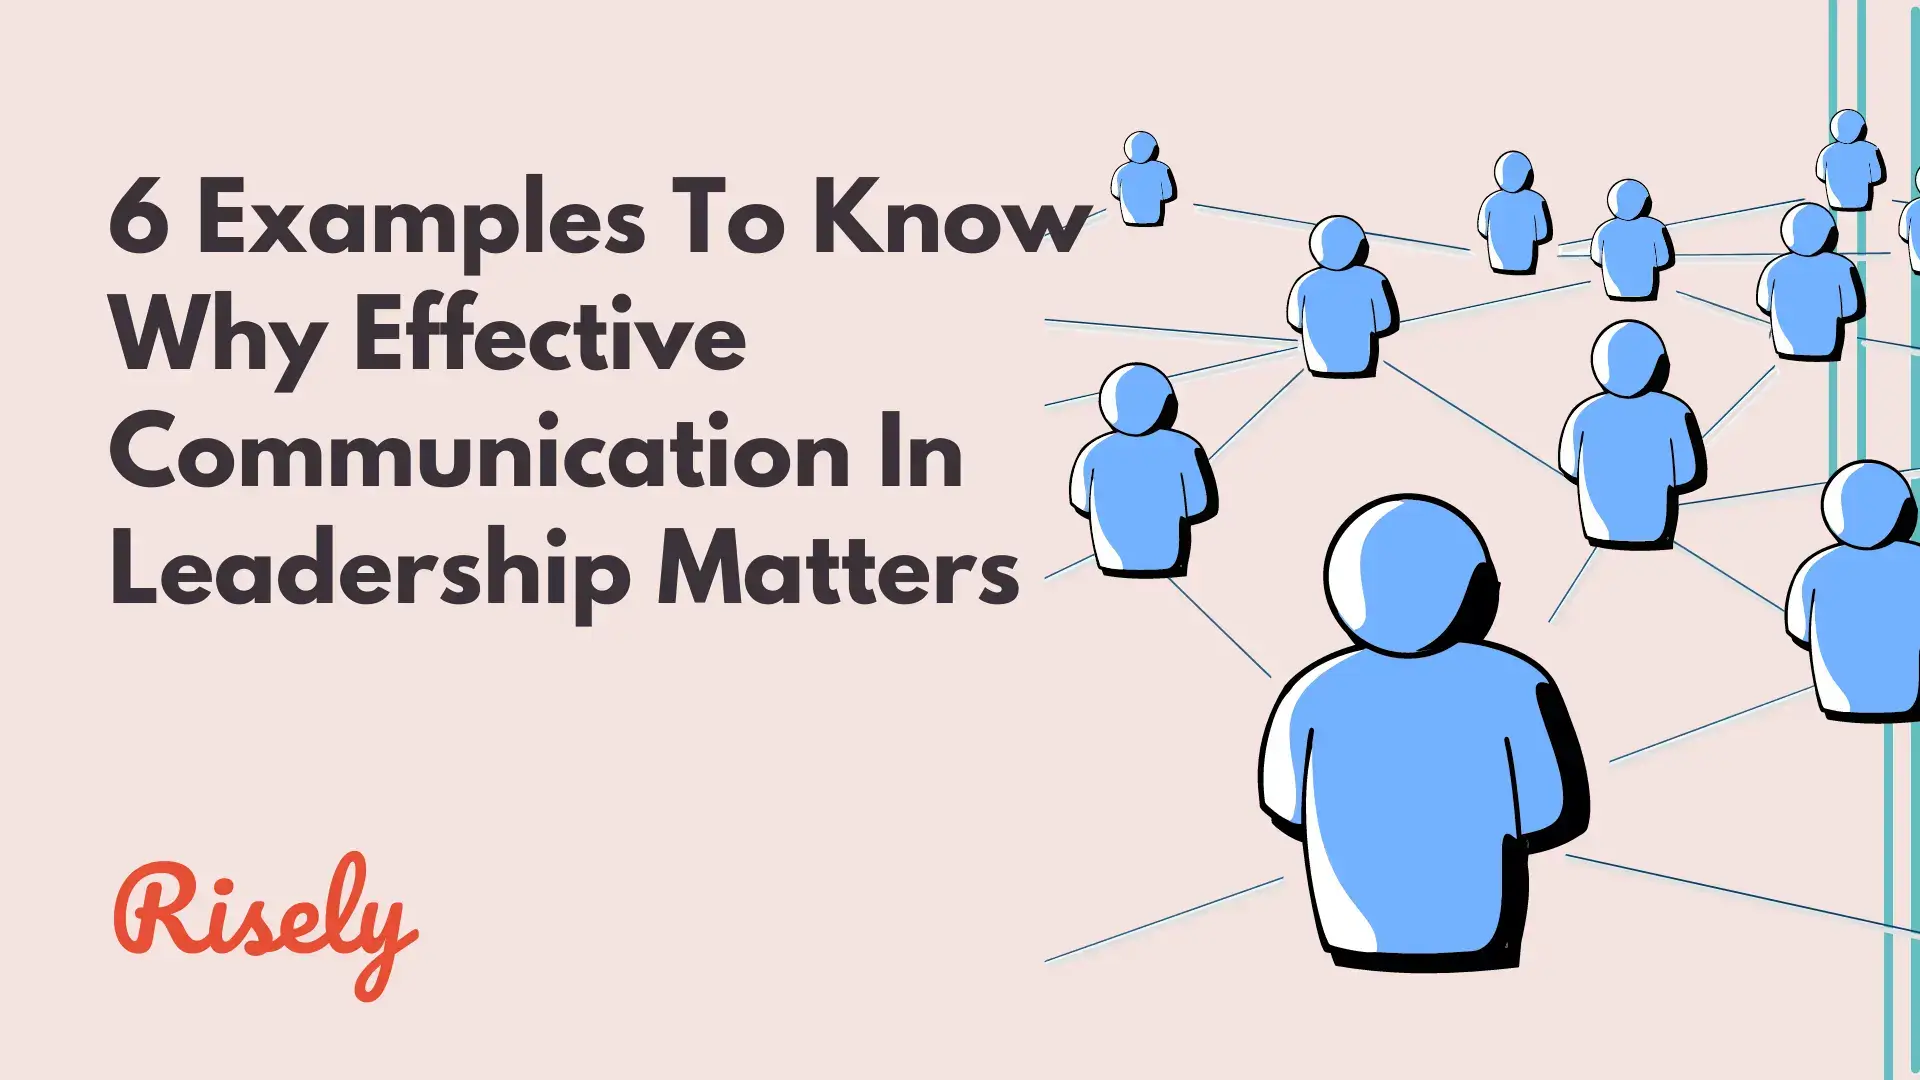 6 Examples To Know Why Effective Communication In Leadership